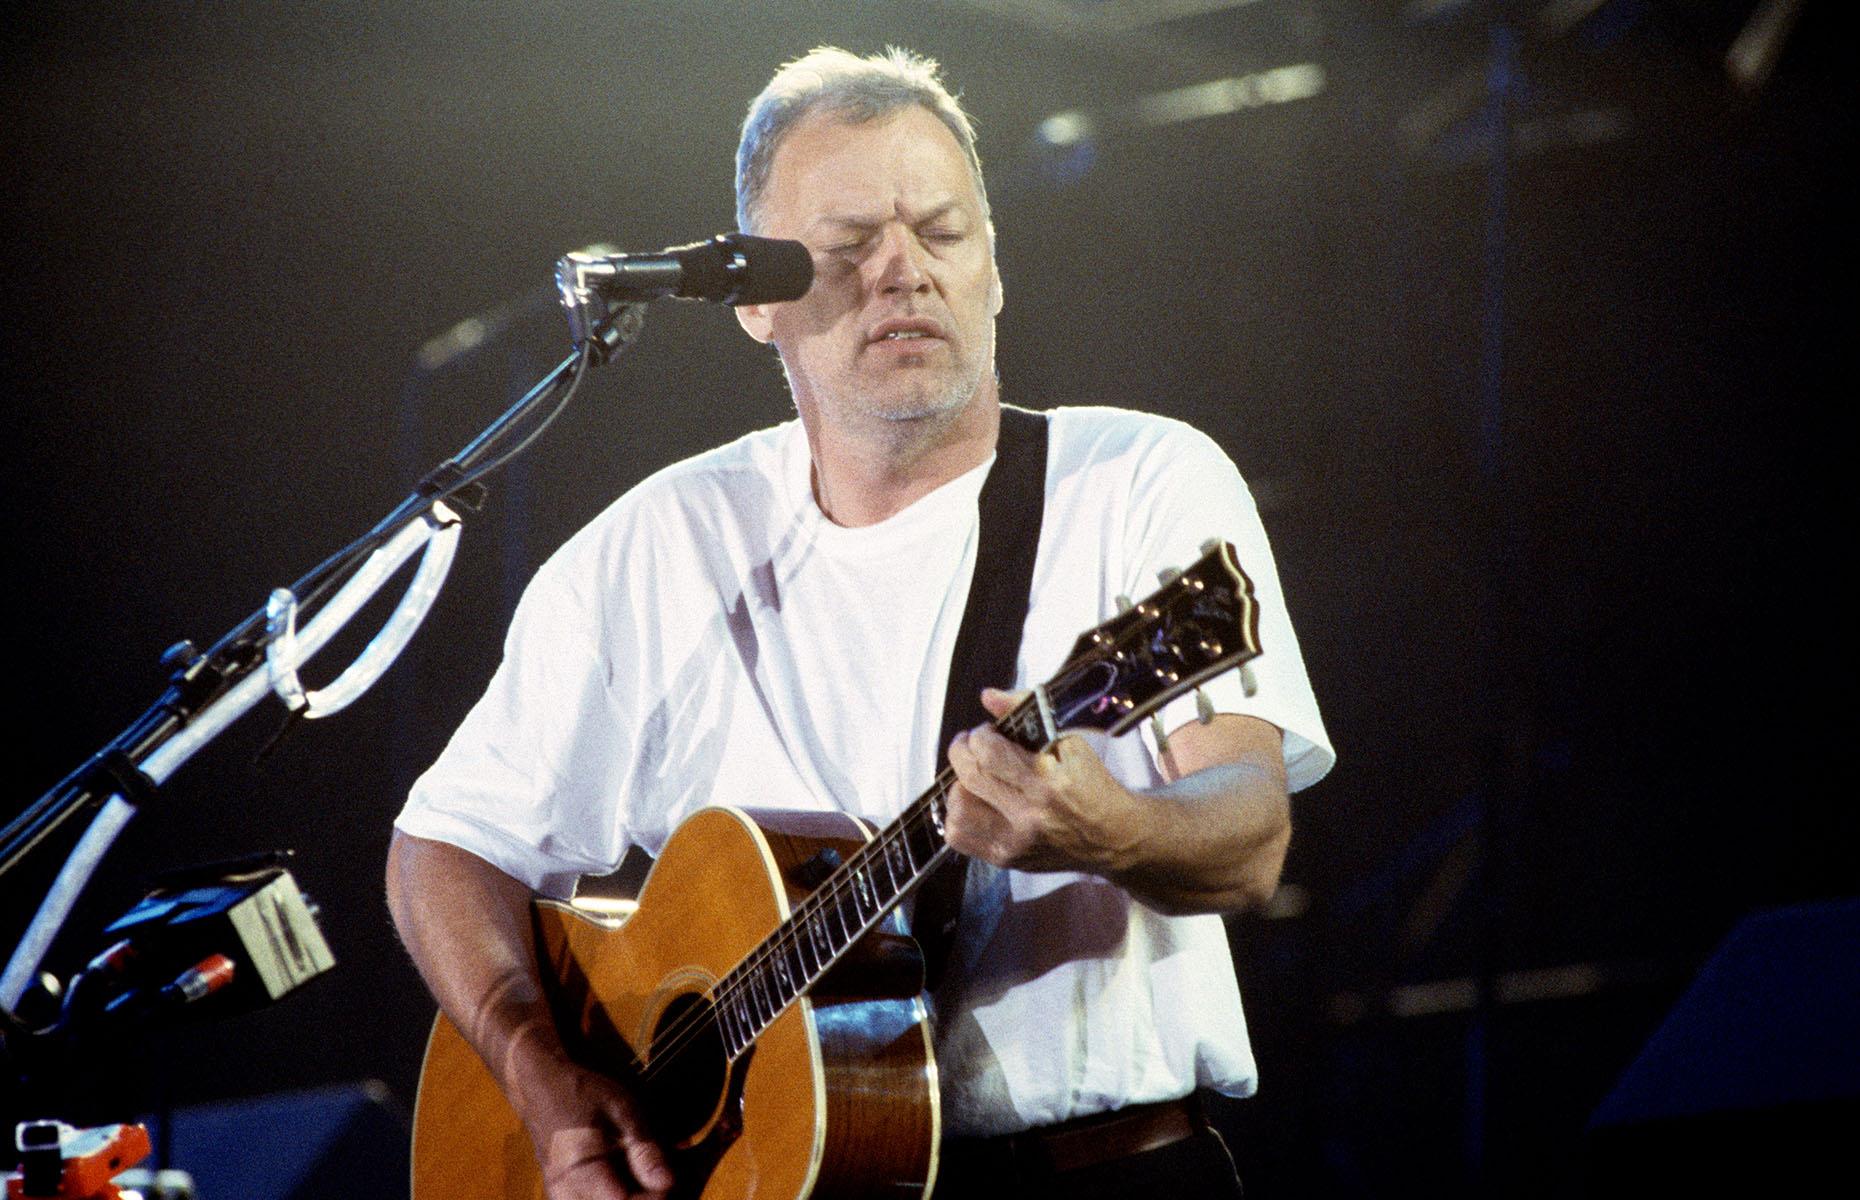 <p>First up, we have 1994's <em>The Division Bell Tour</em>. The final concert tour from legendary British rock band Pink Floyd, it truly marked the end of an era, with the group parting ways shortly afterward.</p>  <p>The psychedelic rockers mesmerized more than five million fans during 111 spellbinding shows across North America and Europe. Some lucky attendees even had the unique opportunity to witness the band's iconic 1973 album,<em> Dark Side of the Moon</em>, performed in its entirety at select concerts.</p>  <p>Though founding member Roger Waters had sensationally quit the band in the 1980s due to creative differences, his absence didn't hinder the tour's roaring financial success. According to<em> Rolling Stone</em>, it grossed $250 million, which equates to an impressive $534 million in today's money.</p>